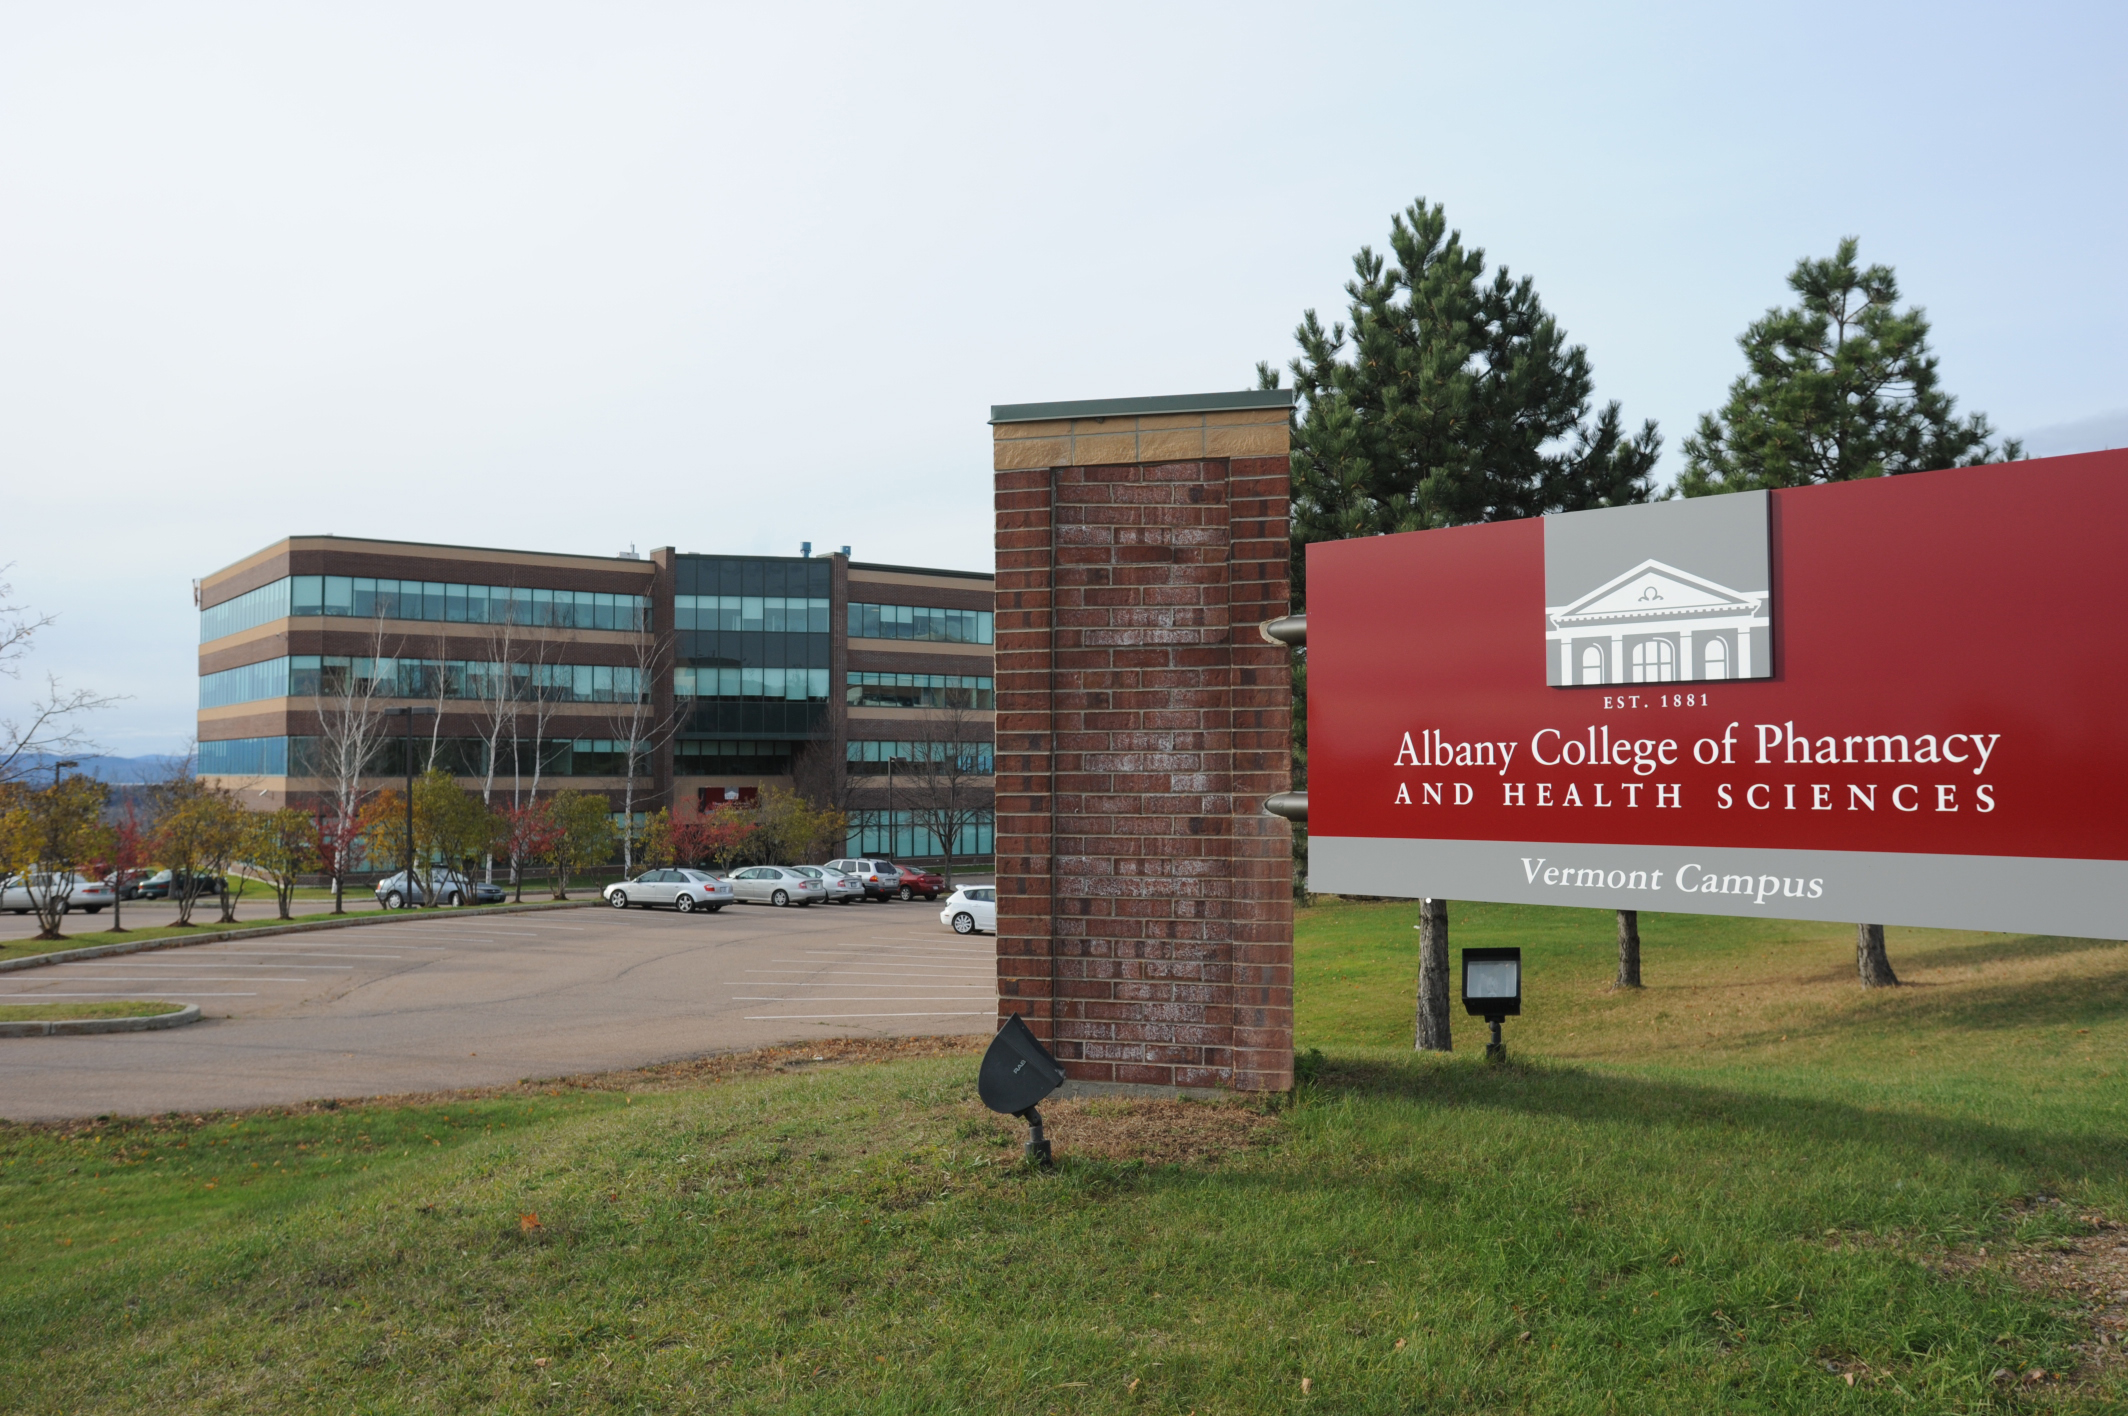 Albany College of Pharmacy and Health Sciences Vermont Campus